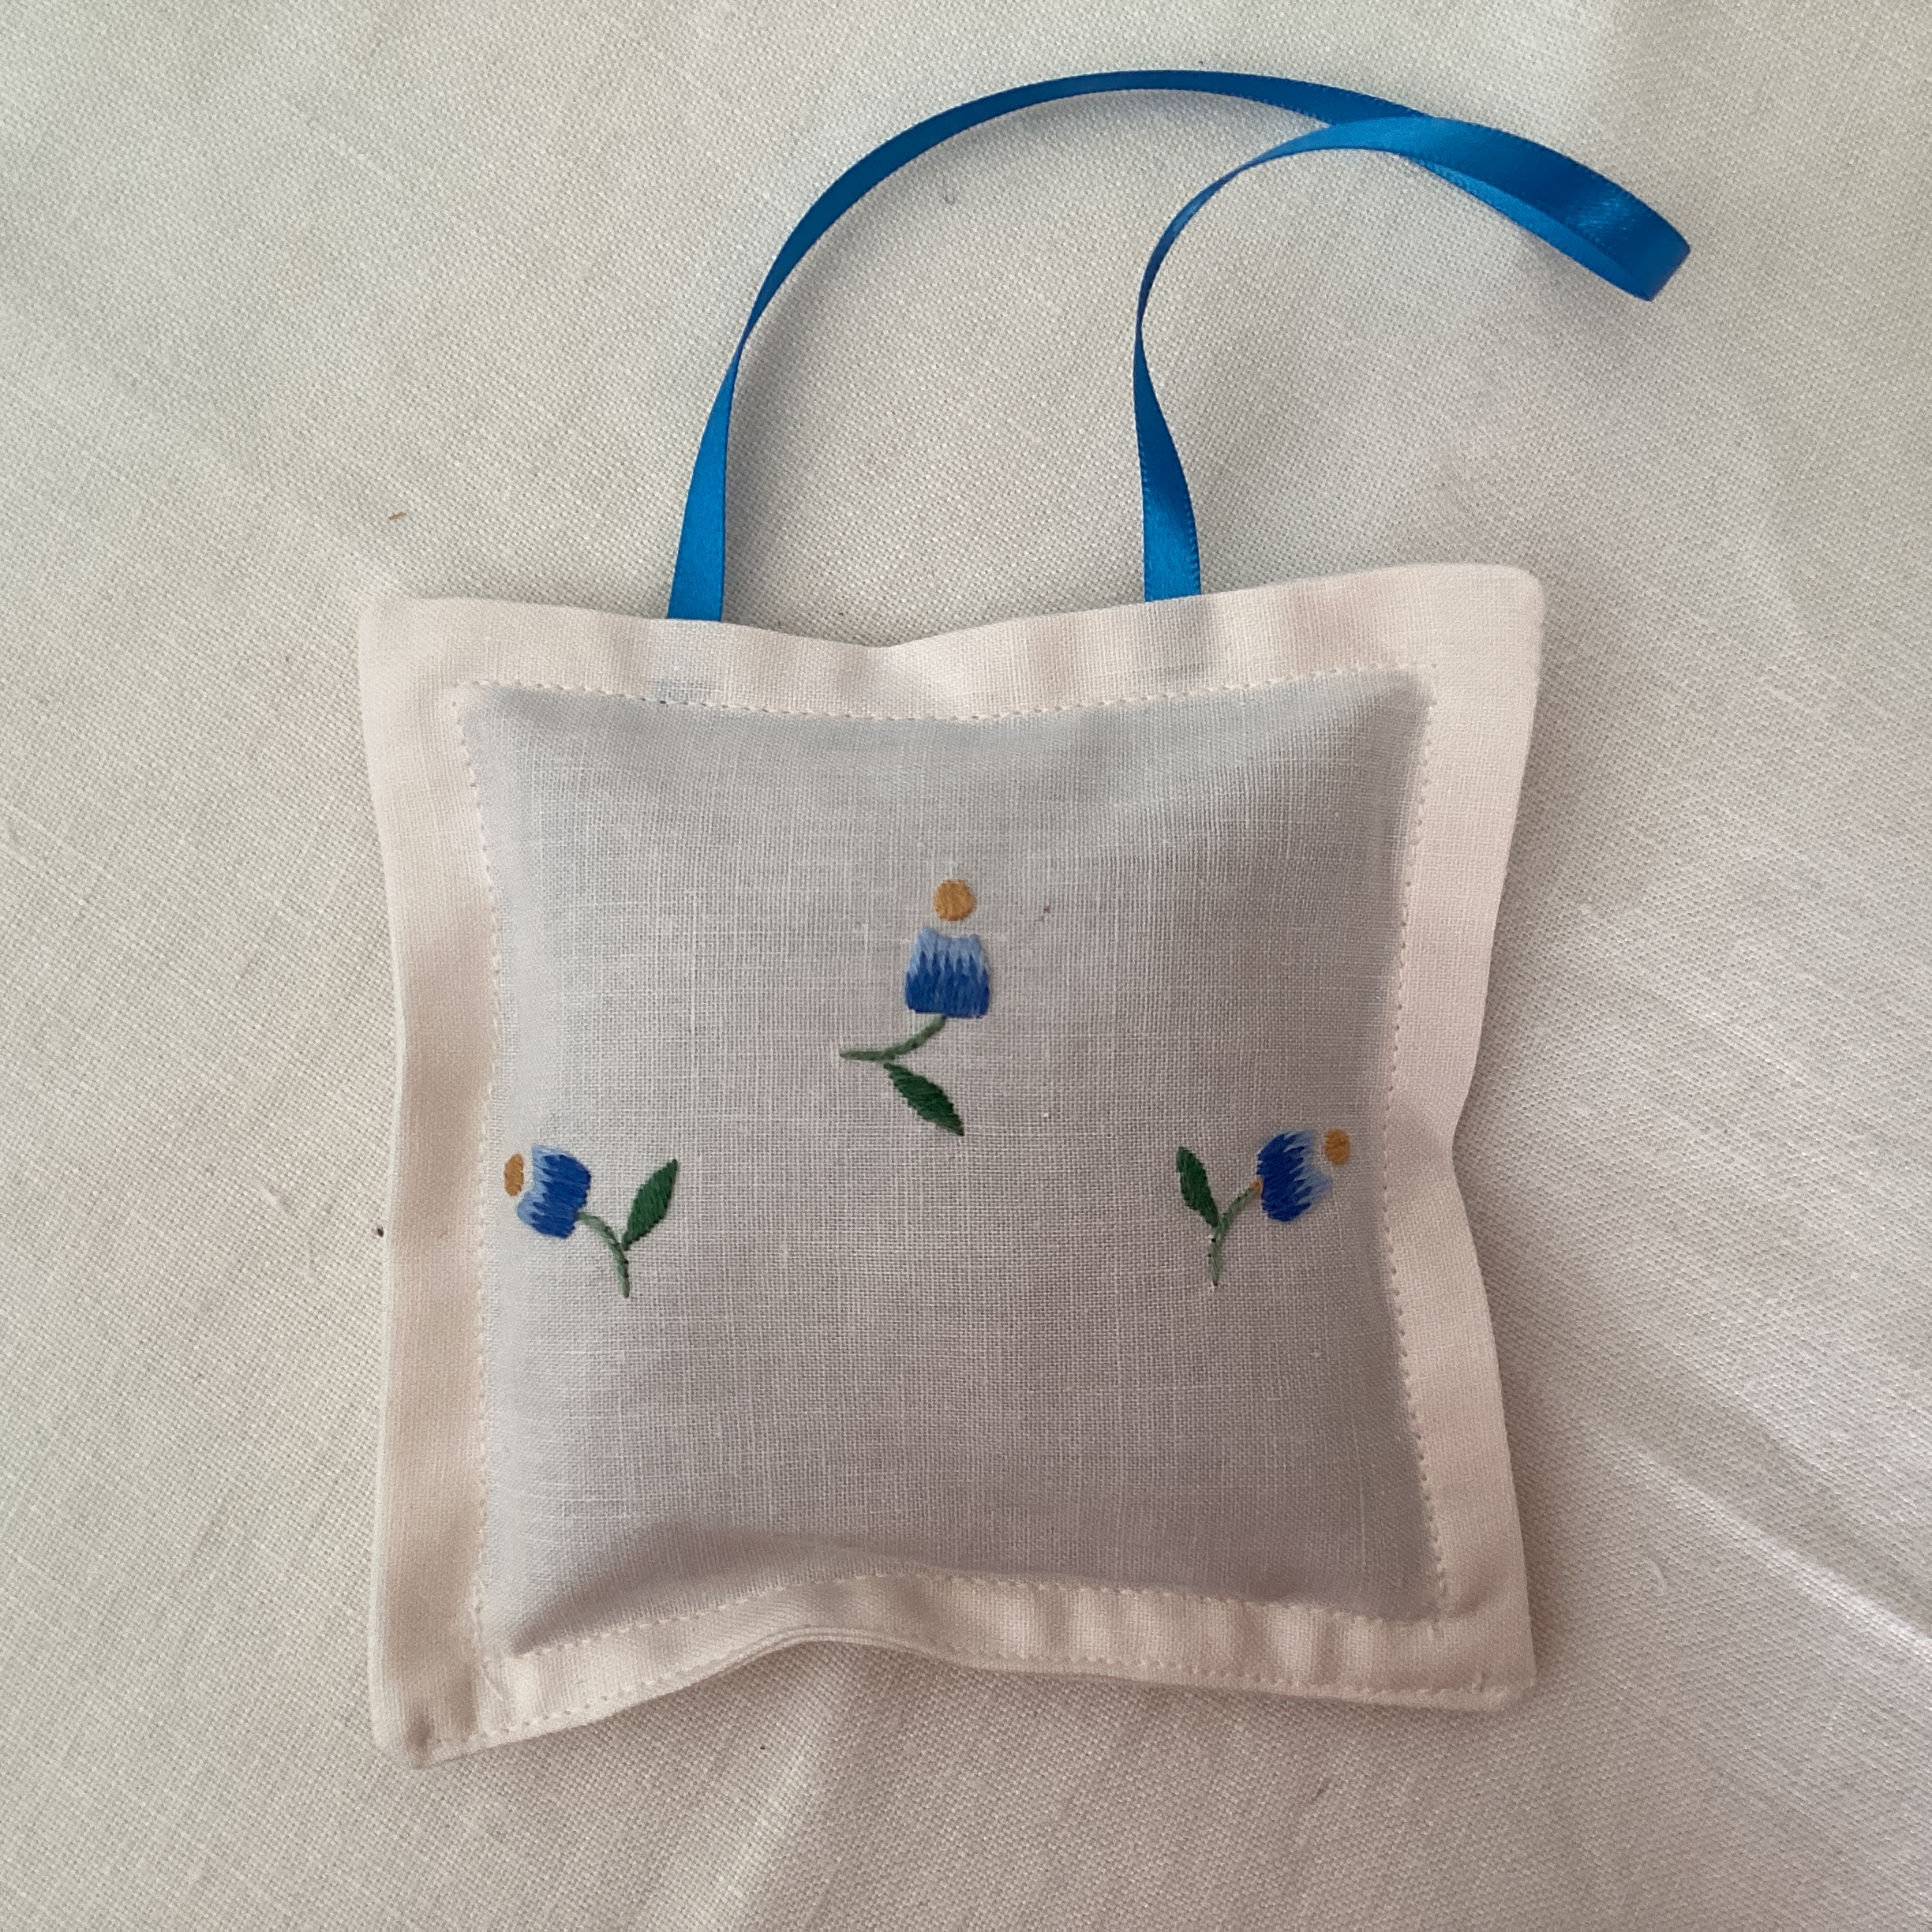 Lavender Bag - vintage embroidery with pale blue flowers